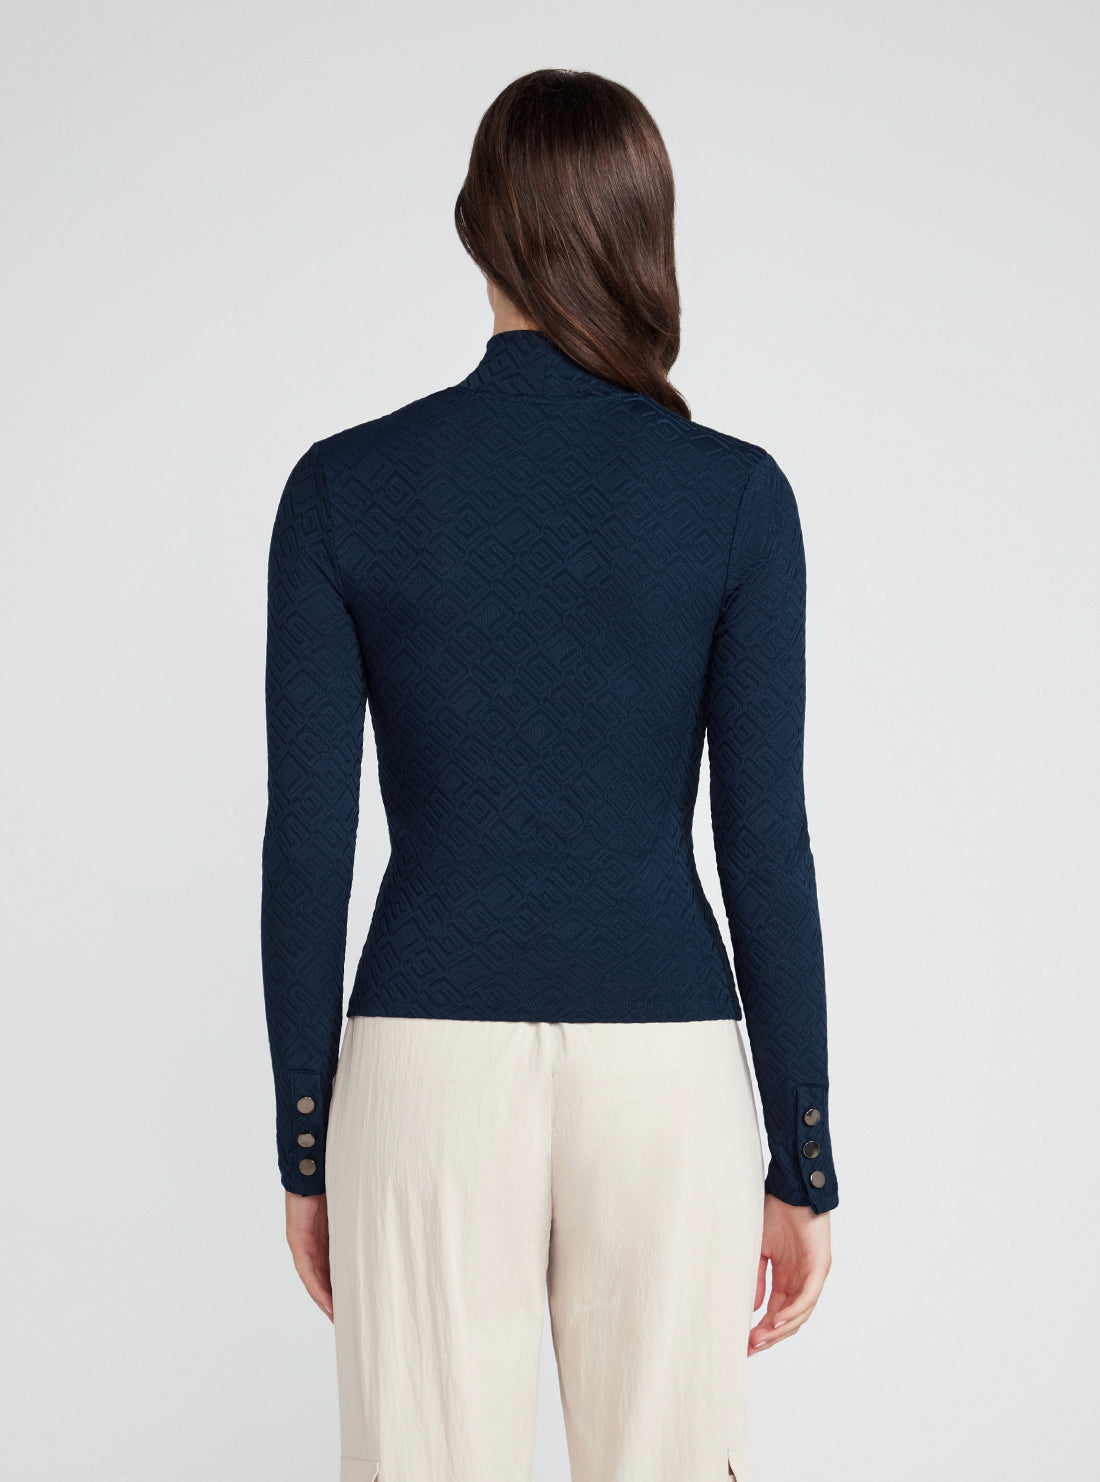 Navy Blue Clio Long Sleeve Top | GUESS Women's Apparel | back view